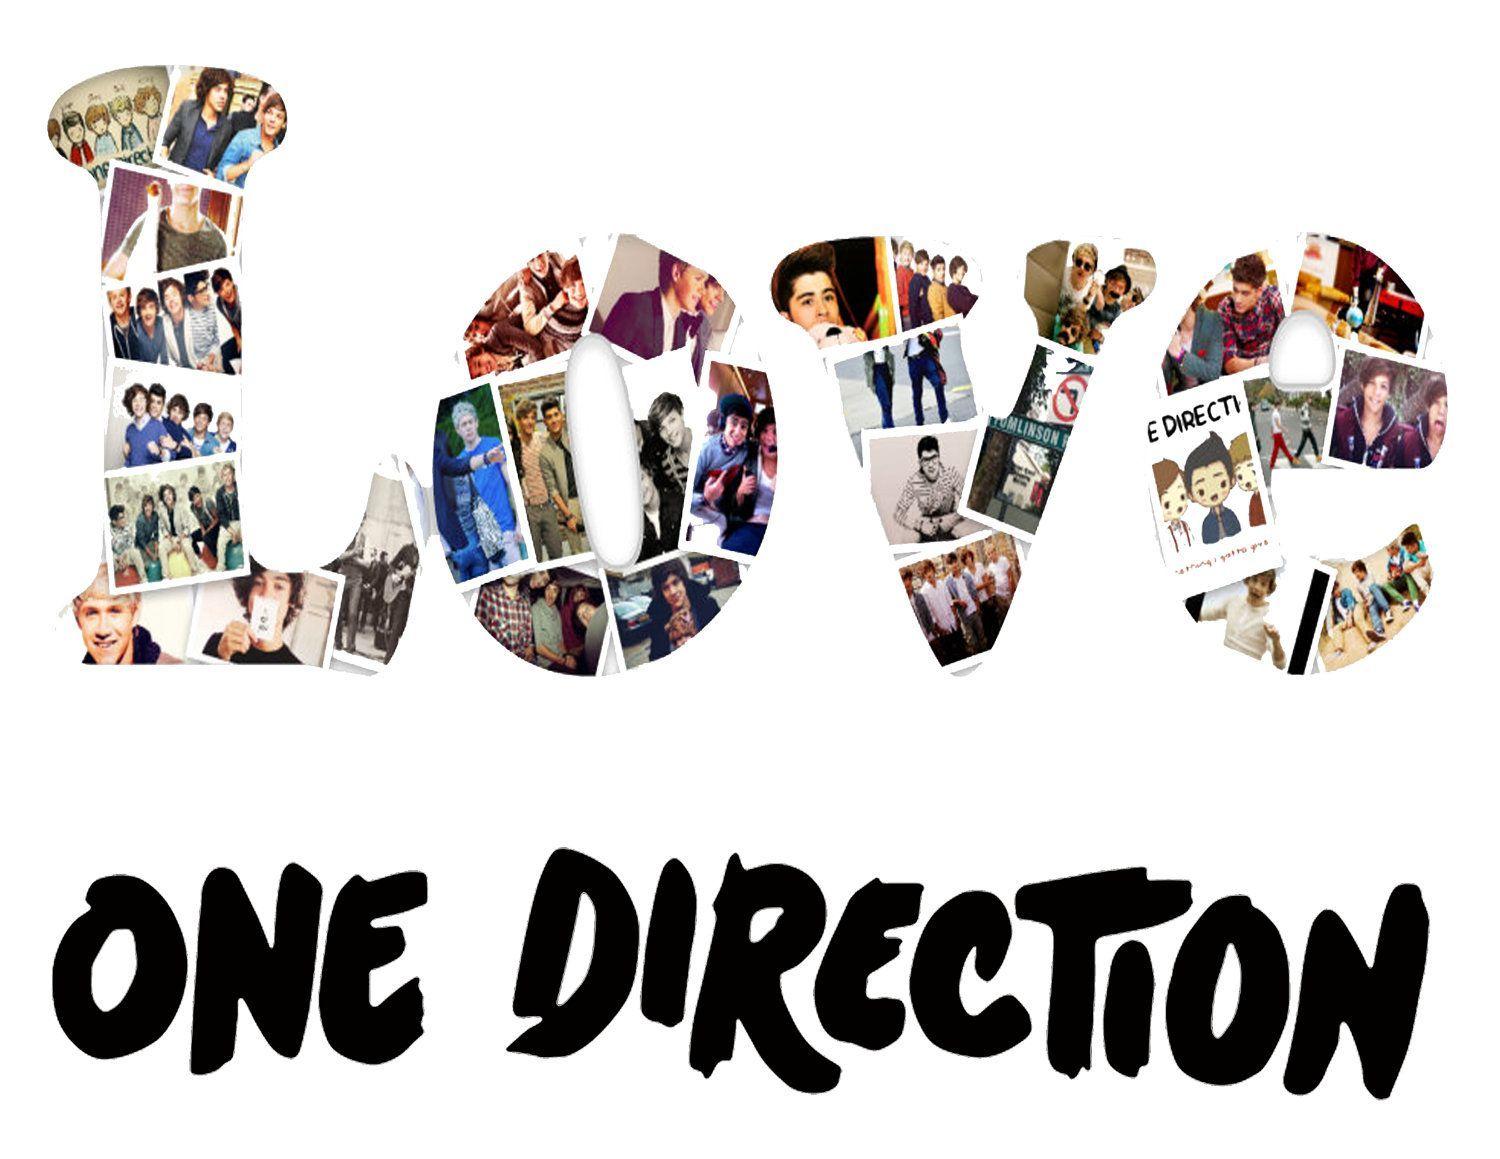 I Love One Direction Logo - one direction wallpaper tumblr | All About Logo: 1D Logo (One ...